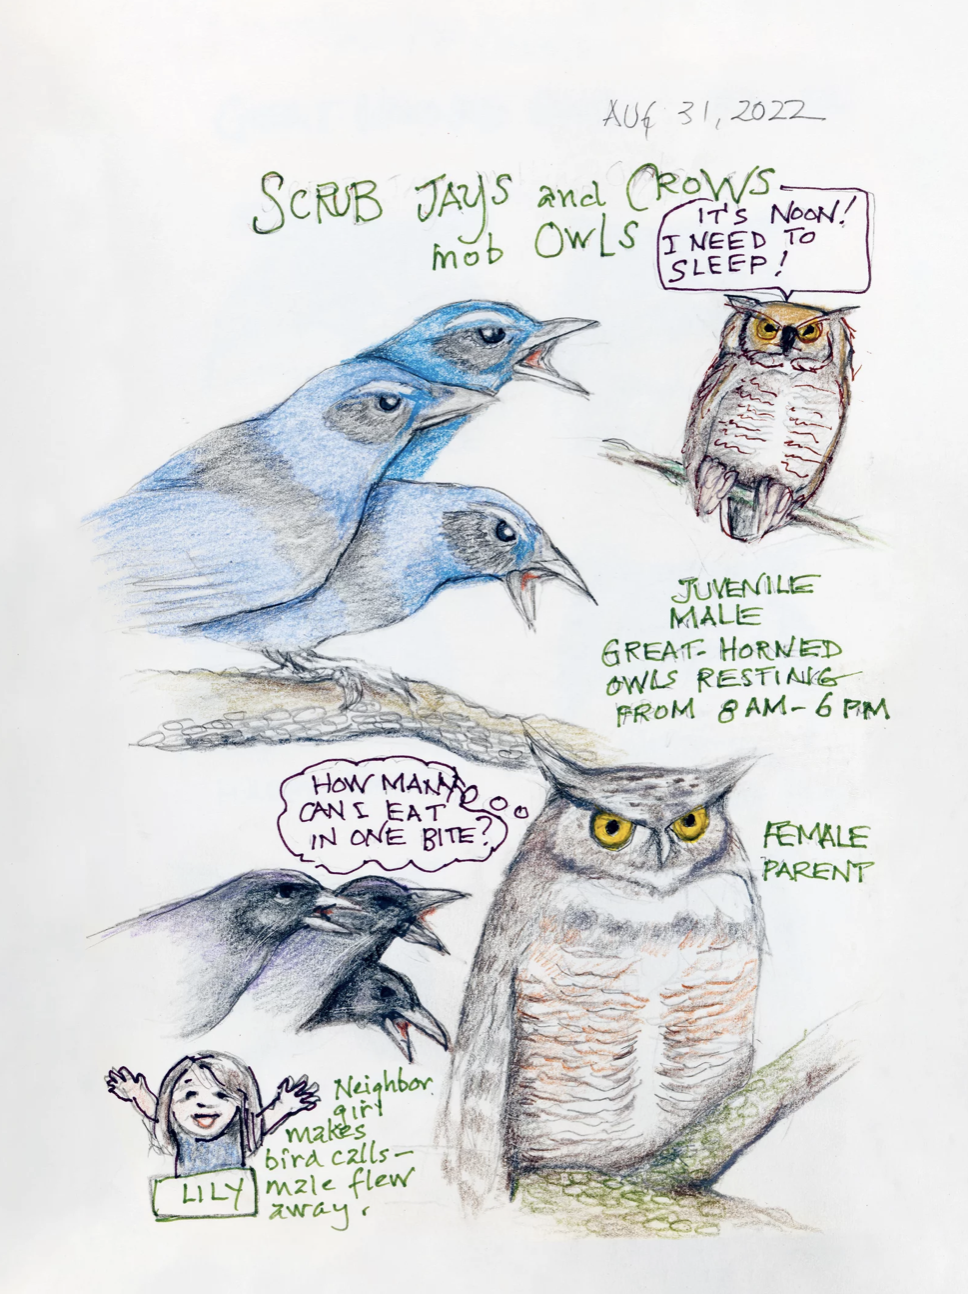 Playful illustrations of three blue scrub jays, an adult female owl and its male offspring, three crows and a young girl.